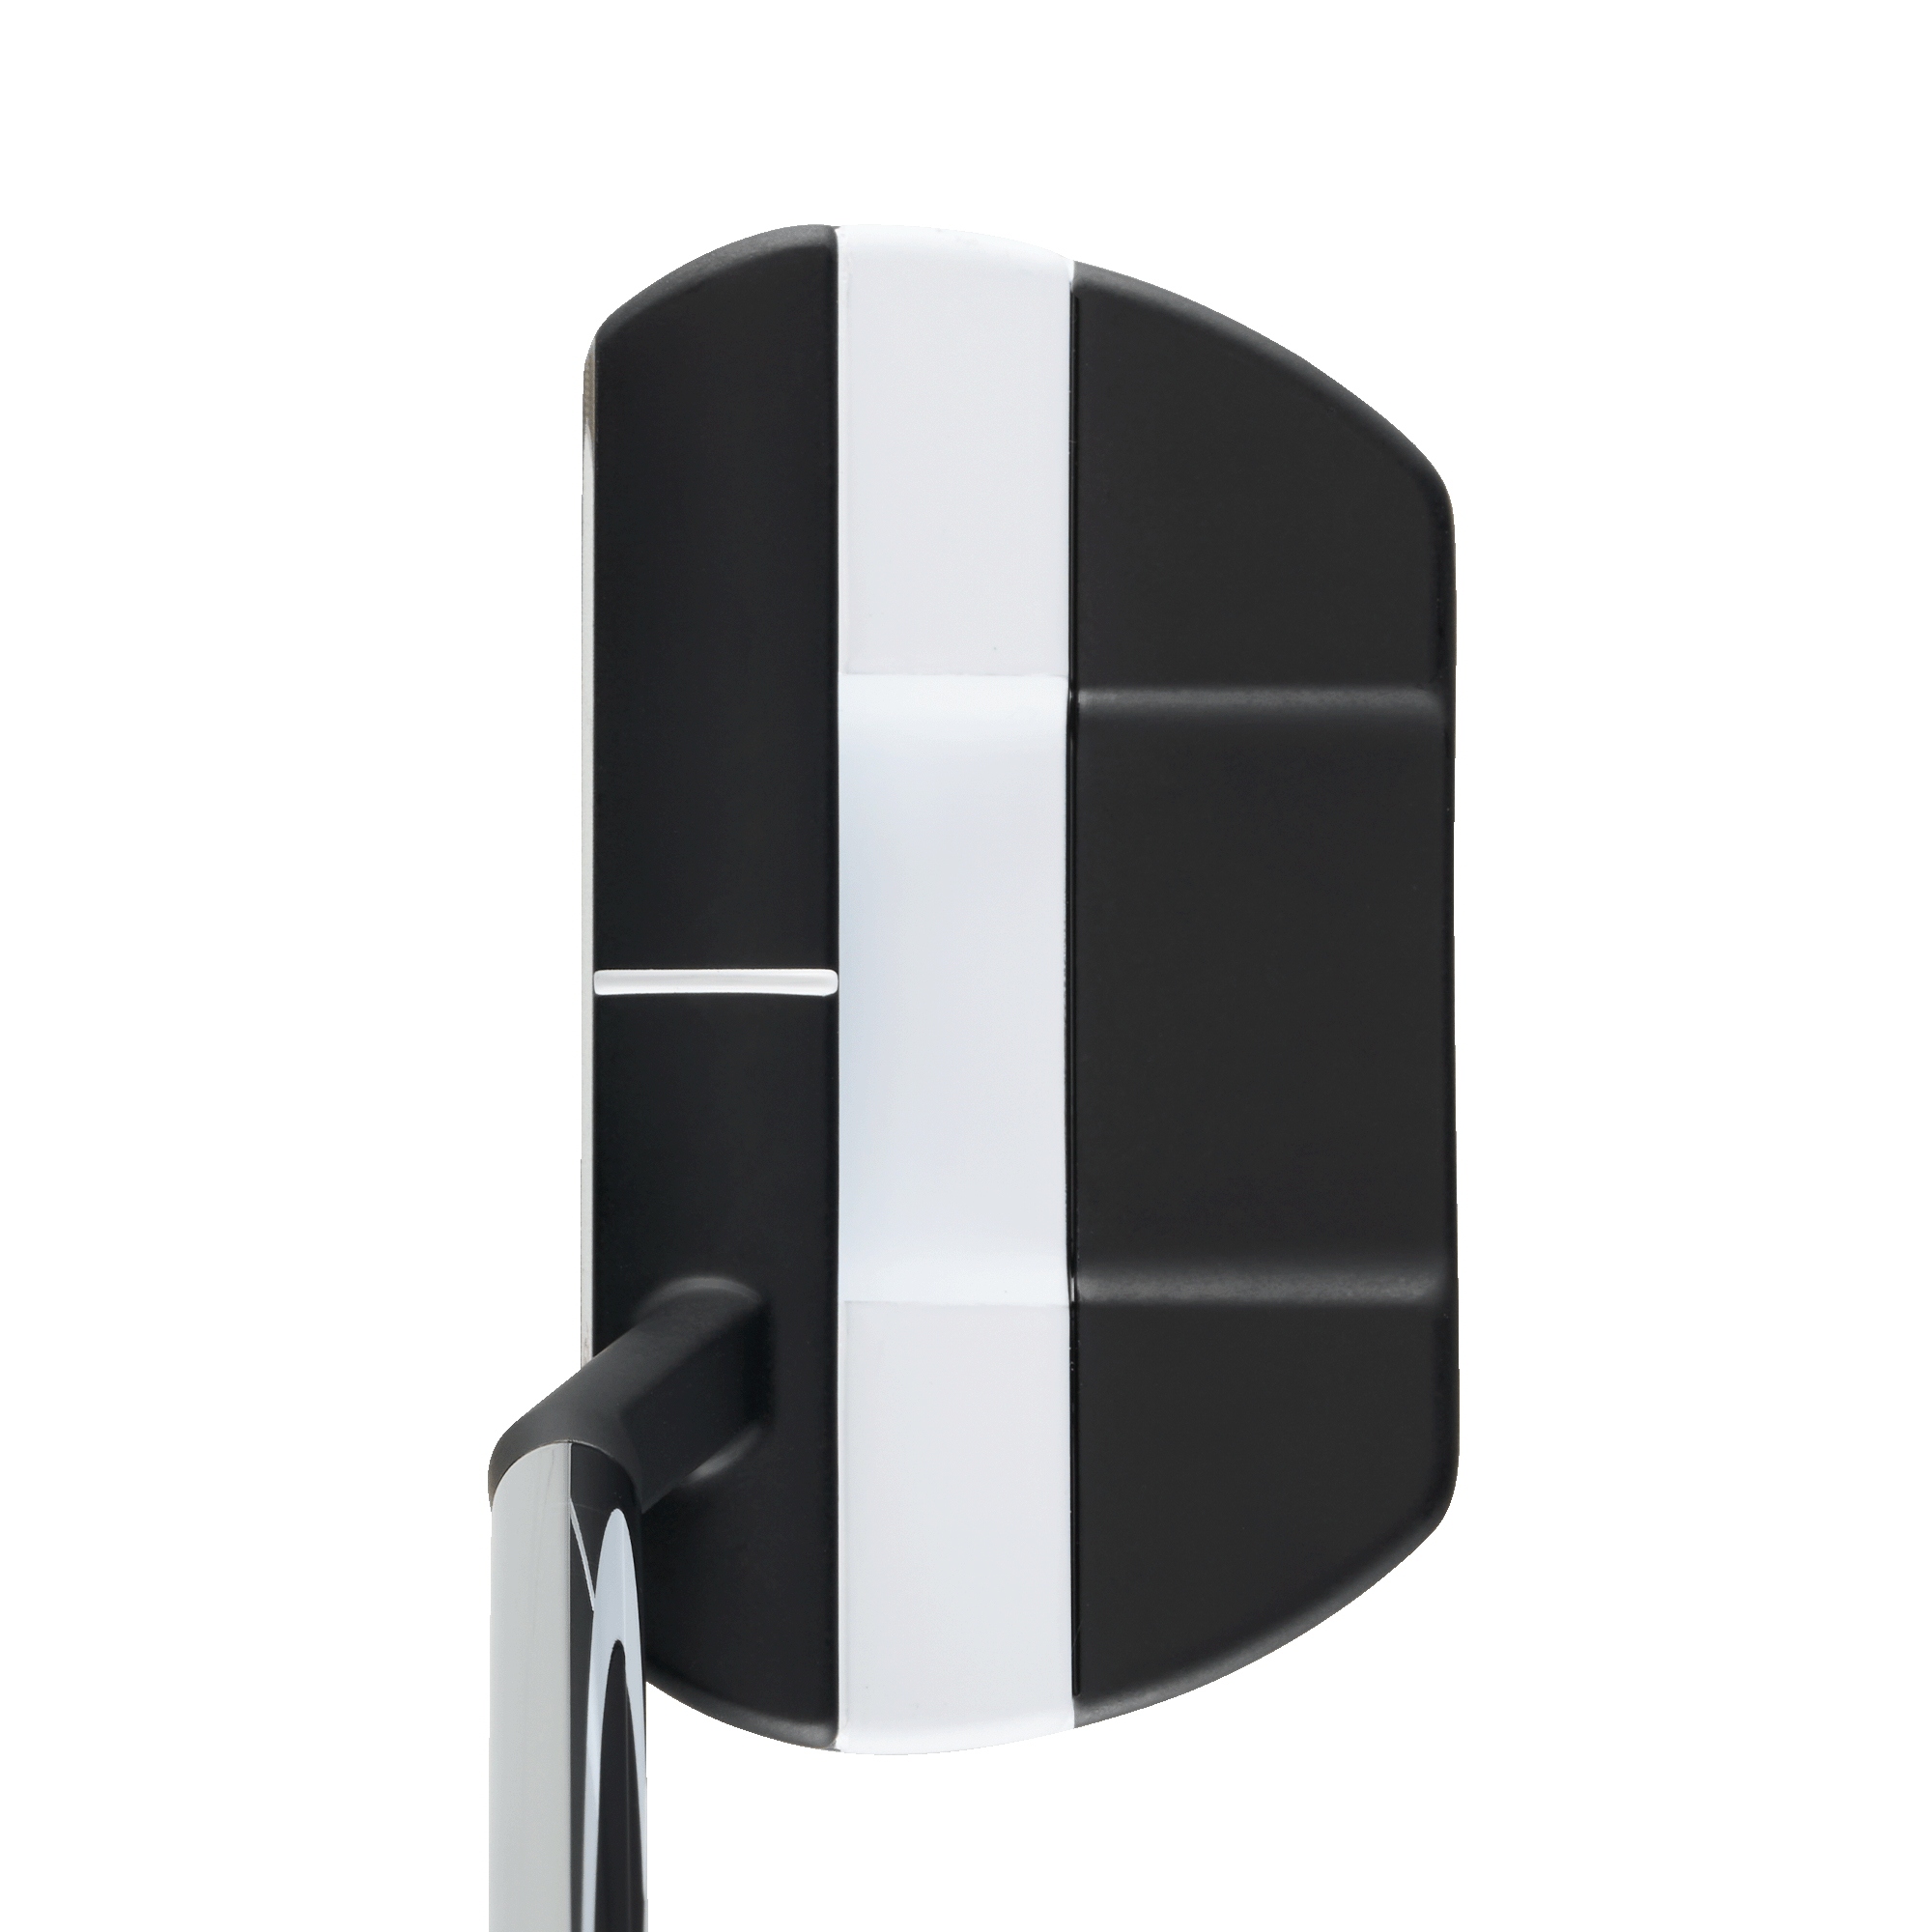 Odyssey White Hot Versa Three T S Putter | Callaway Golf Pre-Owned